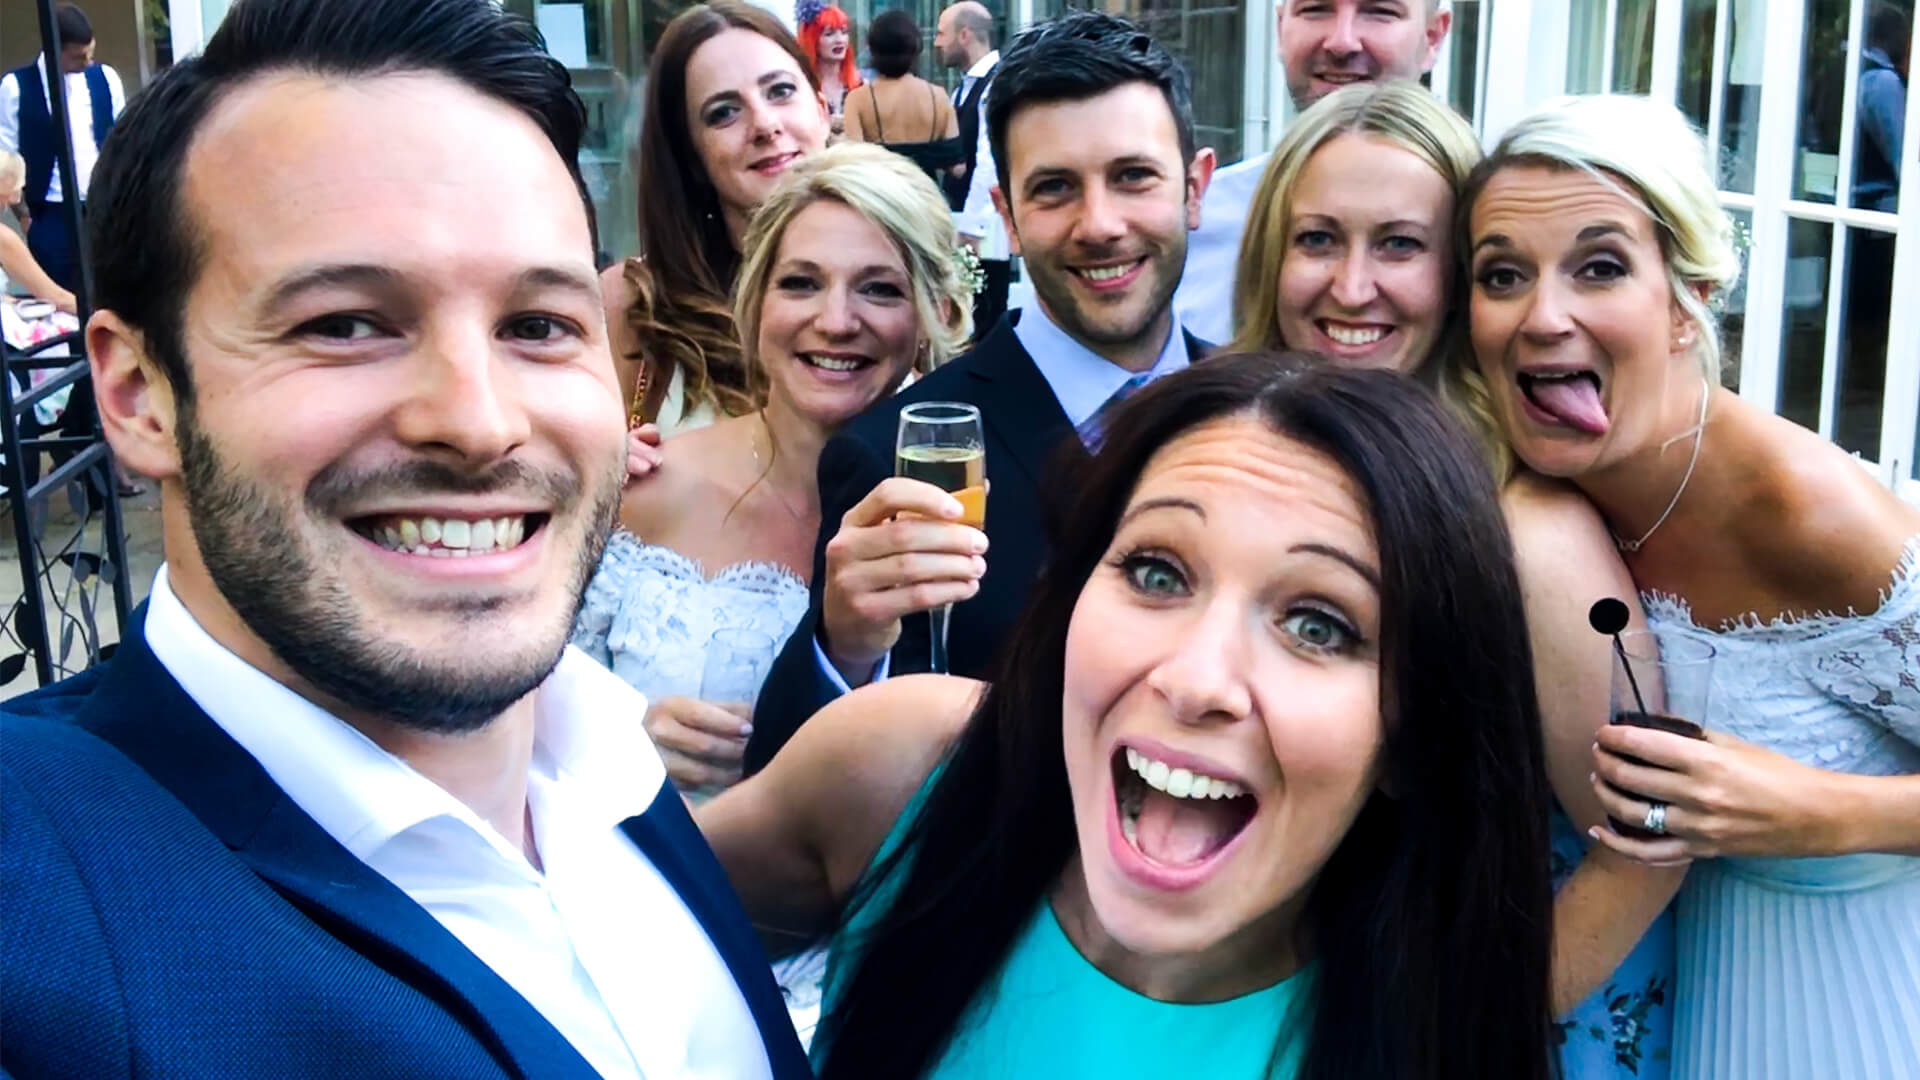 Aaron Calvert Manchester Wedding Magician taking selfie with guests during wedding entertainment